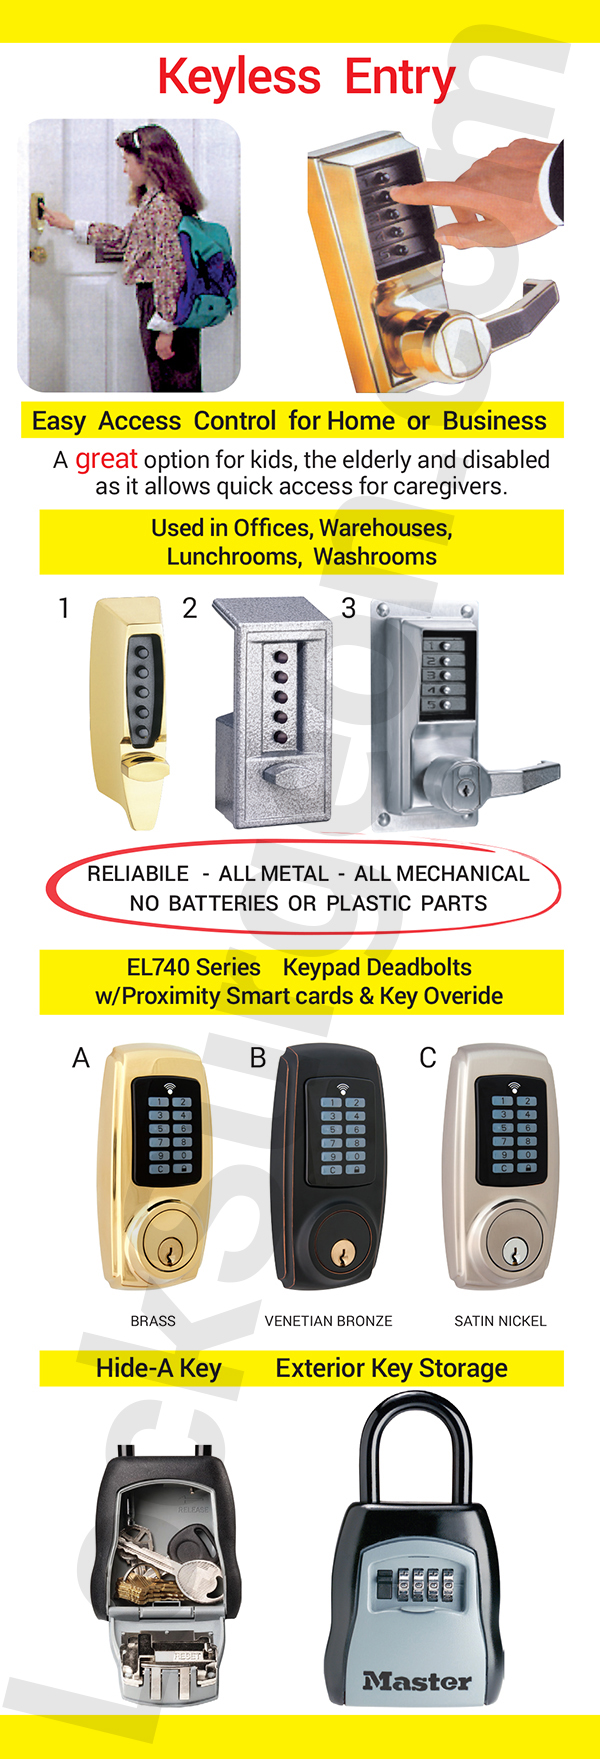 Edmonton South Lock Surgeon keyless entry easy access control for home or businesses.